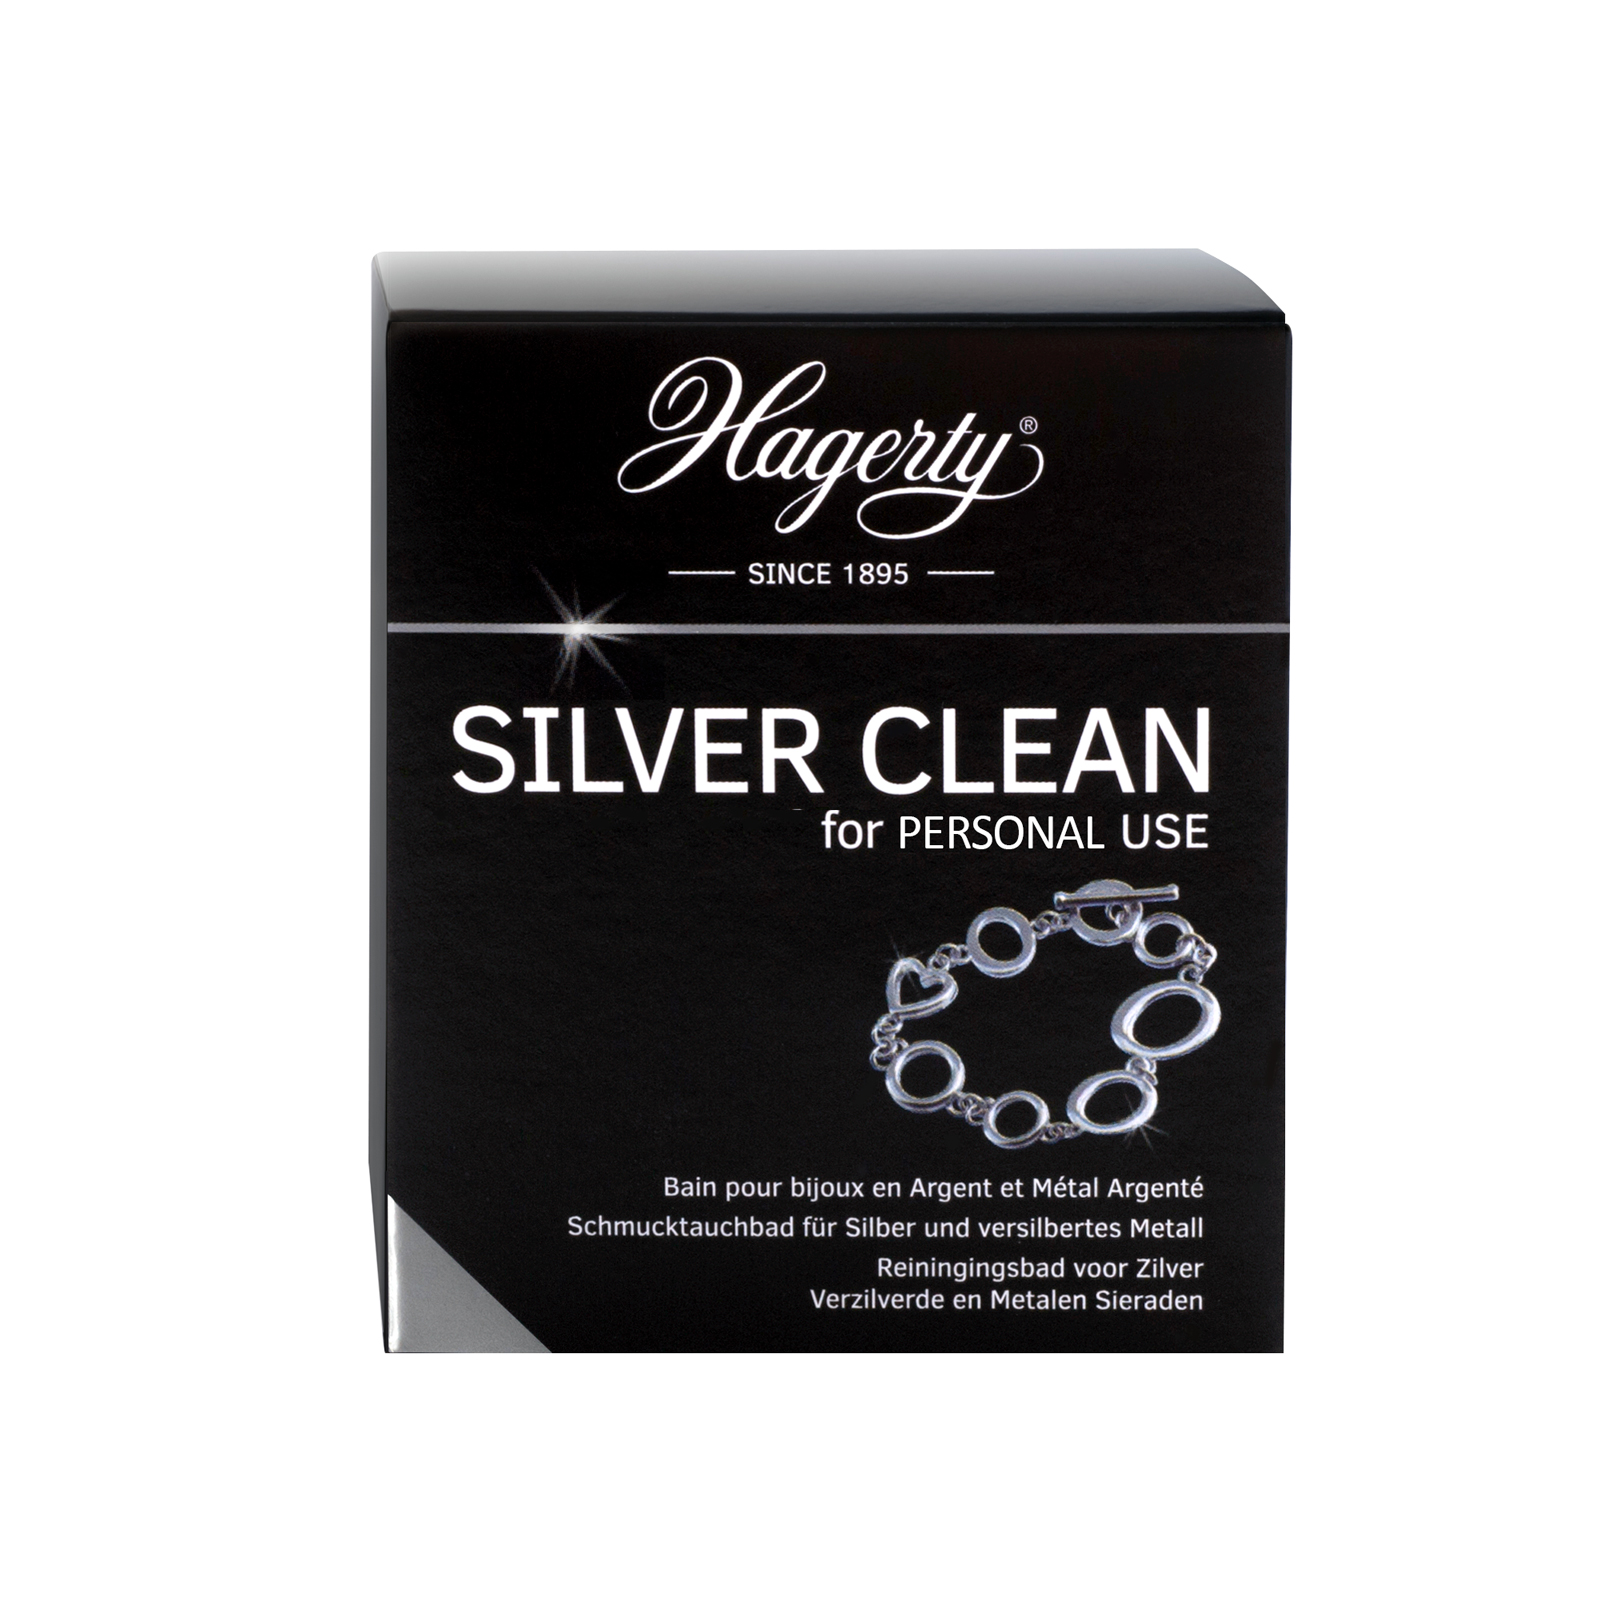 Hagerty Silver Clean for personal use, juwelenverzorgingsproduct voor zilver, 170 ml